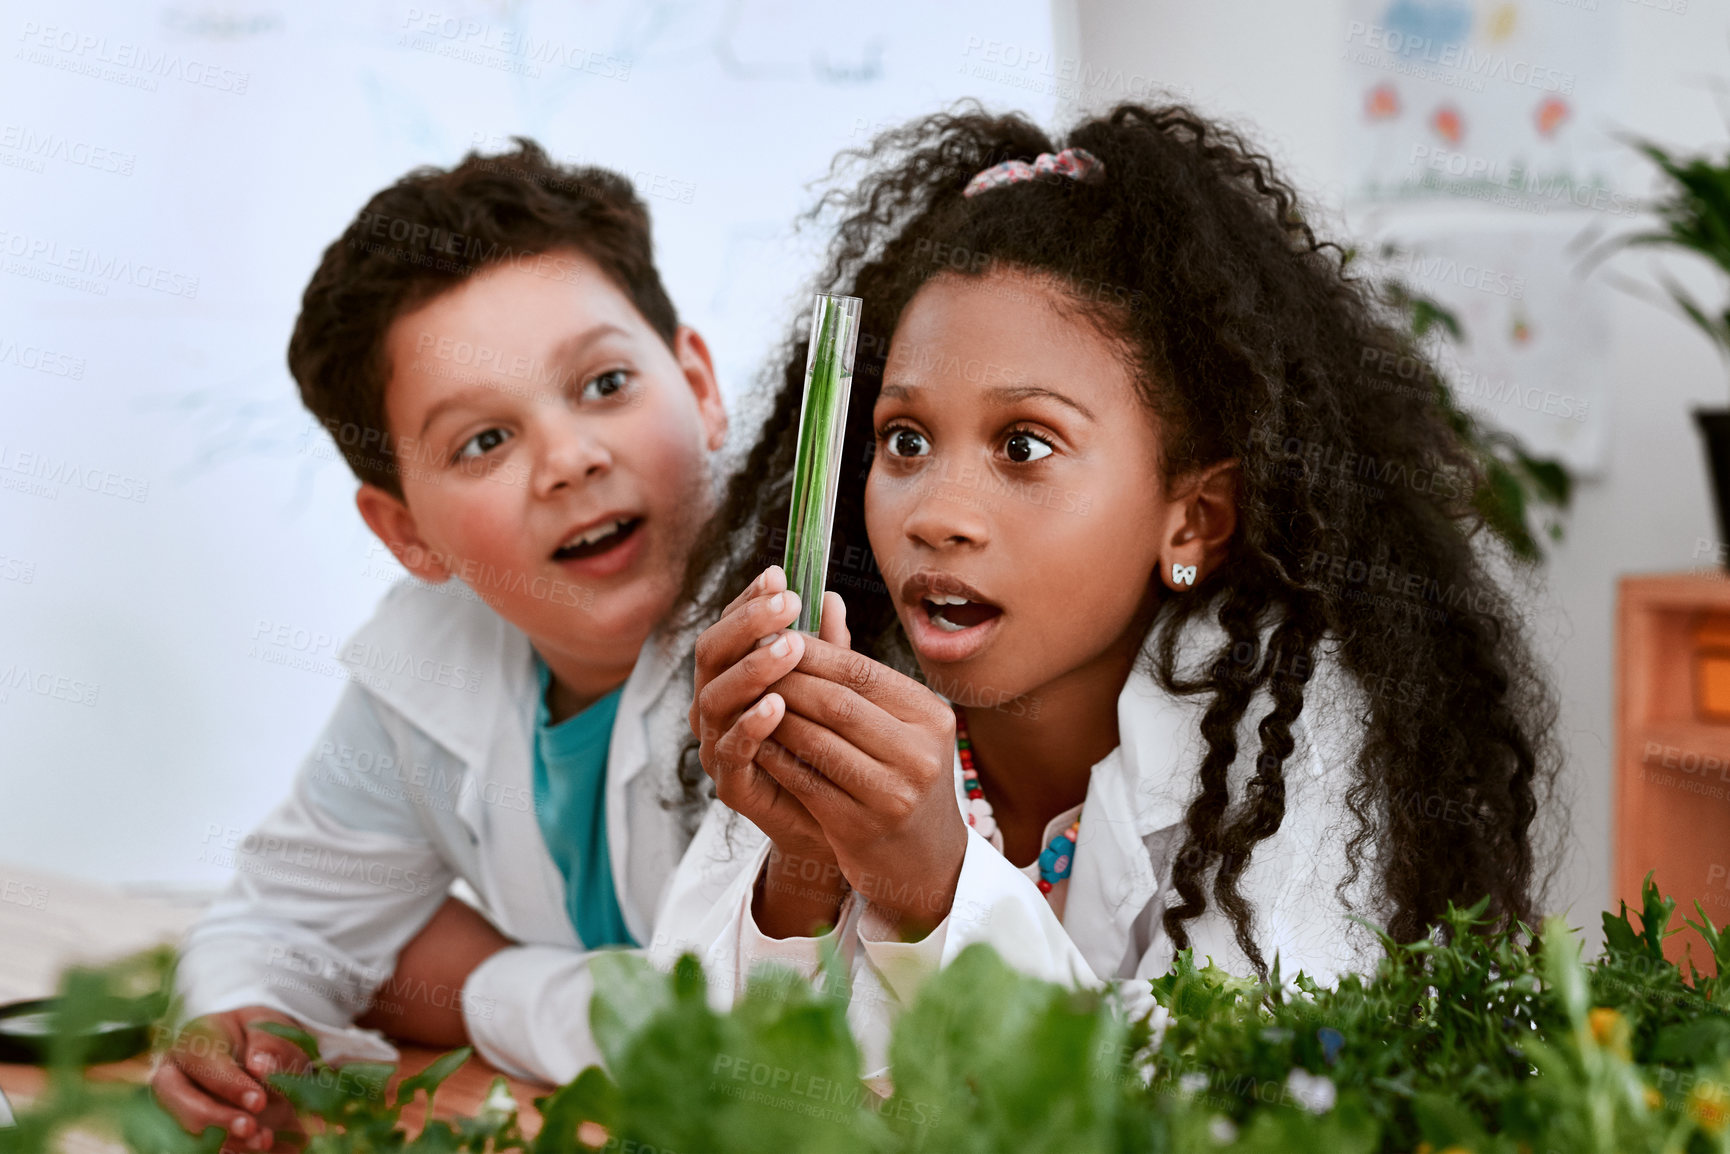 Buy stock photo Shot of an adorable little boy and girl learning about plants at school